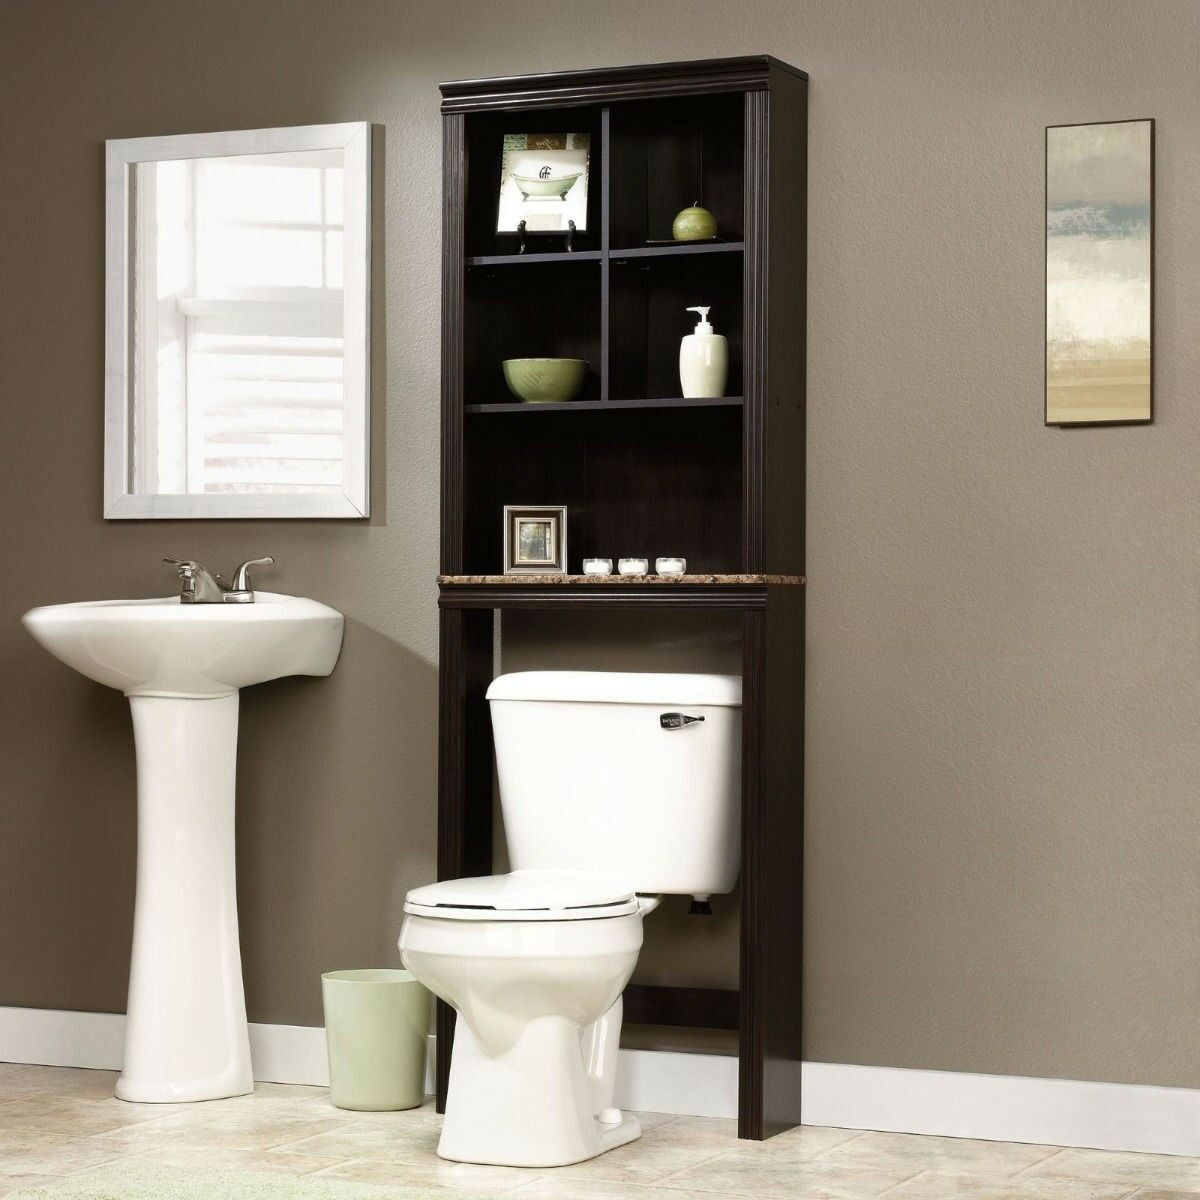 Bathroom Cabinets Over The Toilet
 Bathroom Cabinet Over Toilet Shelf Space Saver Storage